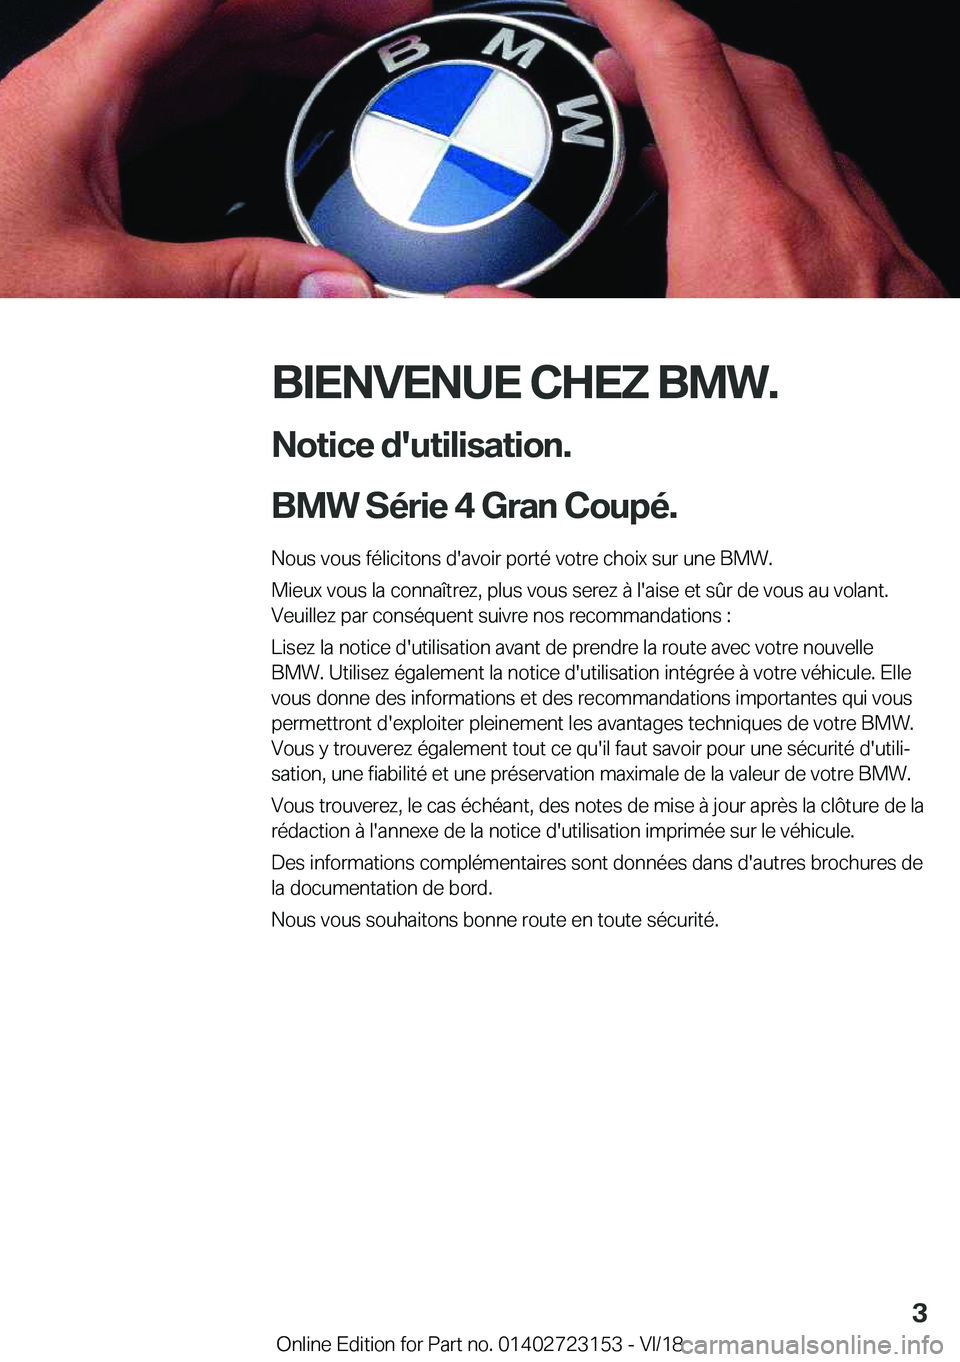 BMW 4 SERIES GRAN COUPE 2019  Notices Demploi (in French) �B�I�E�N�V�E�N�U�E��C�H�E�;��B�M�W�.�N�o�t�i�c�e��d�'�u�t�i�l�i�s�a�t�i�o�n�.
�B�M�W��S�é�r�i�e��4��G�r�a�n��C�o�u�p�é�.�
�N�o�u�s��v�o�u�s��f�é�l�i�c�i�t�o�n�s��d�'�a�v�o�i�r��